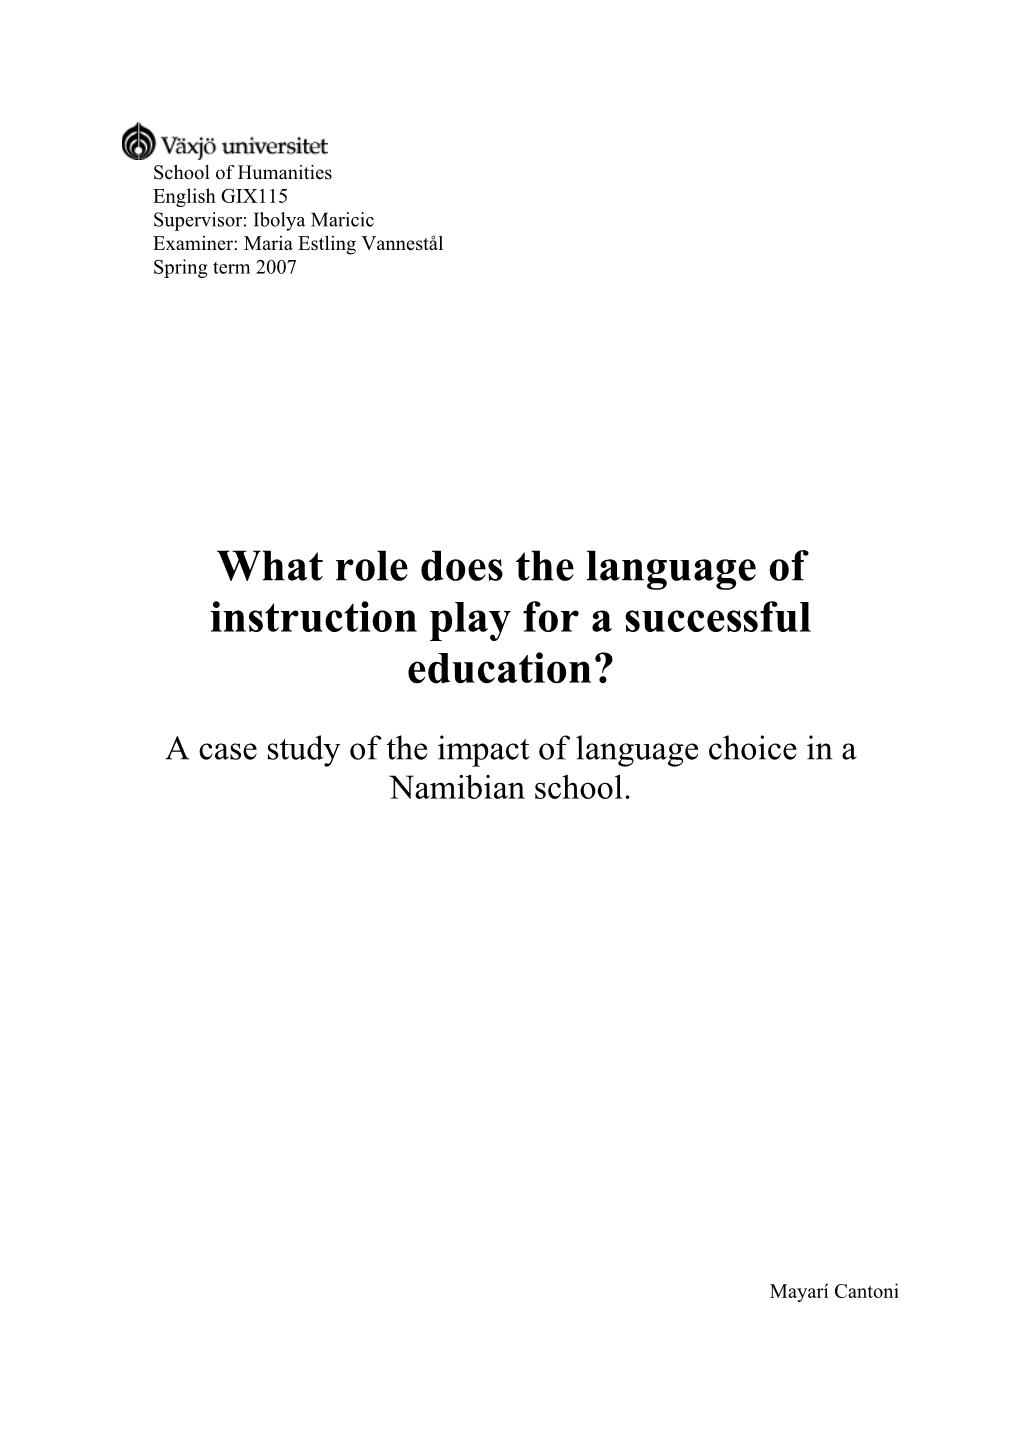 What Role Does the Language of Instruction Play for a Successful Education?